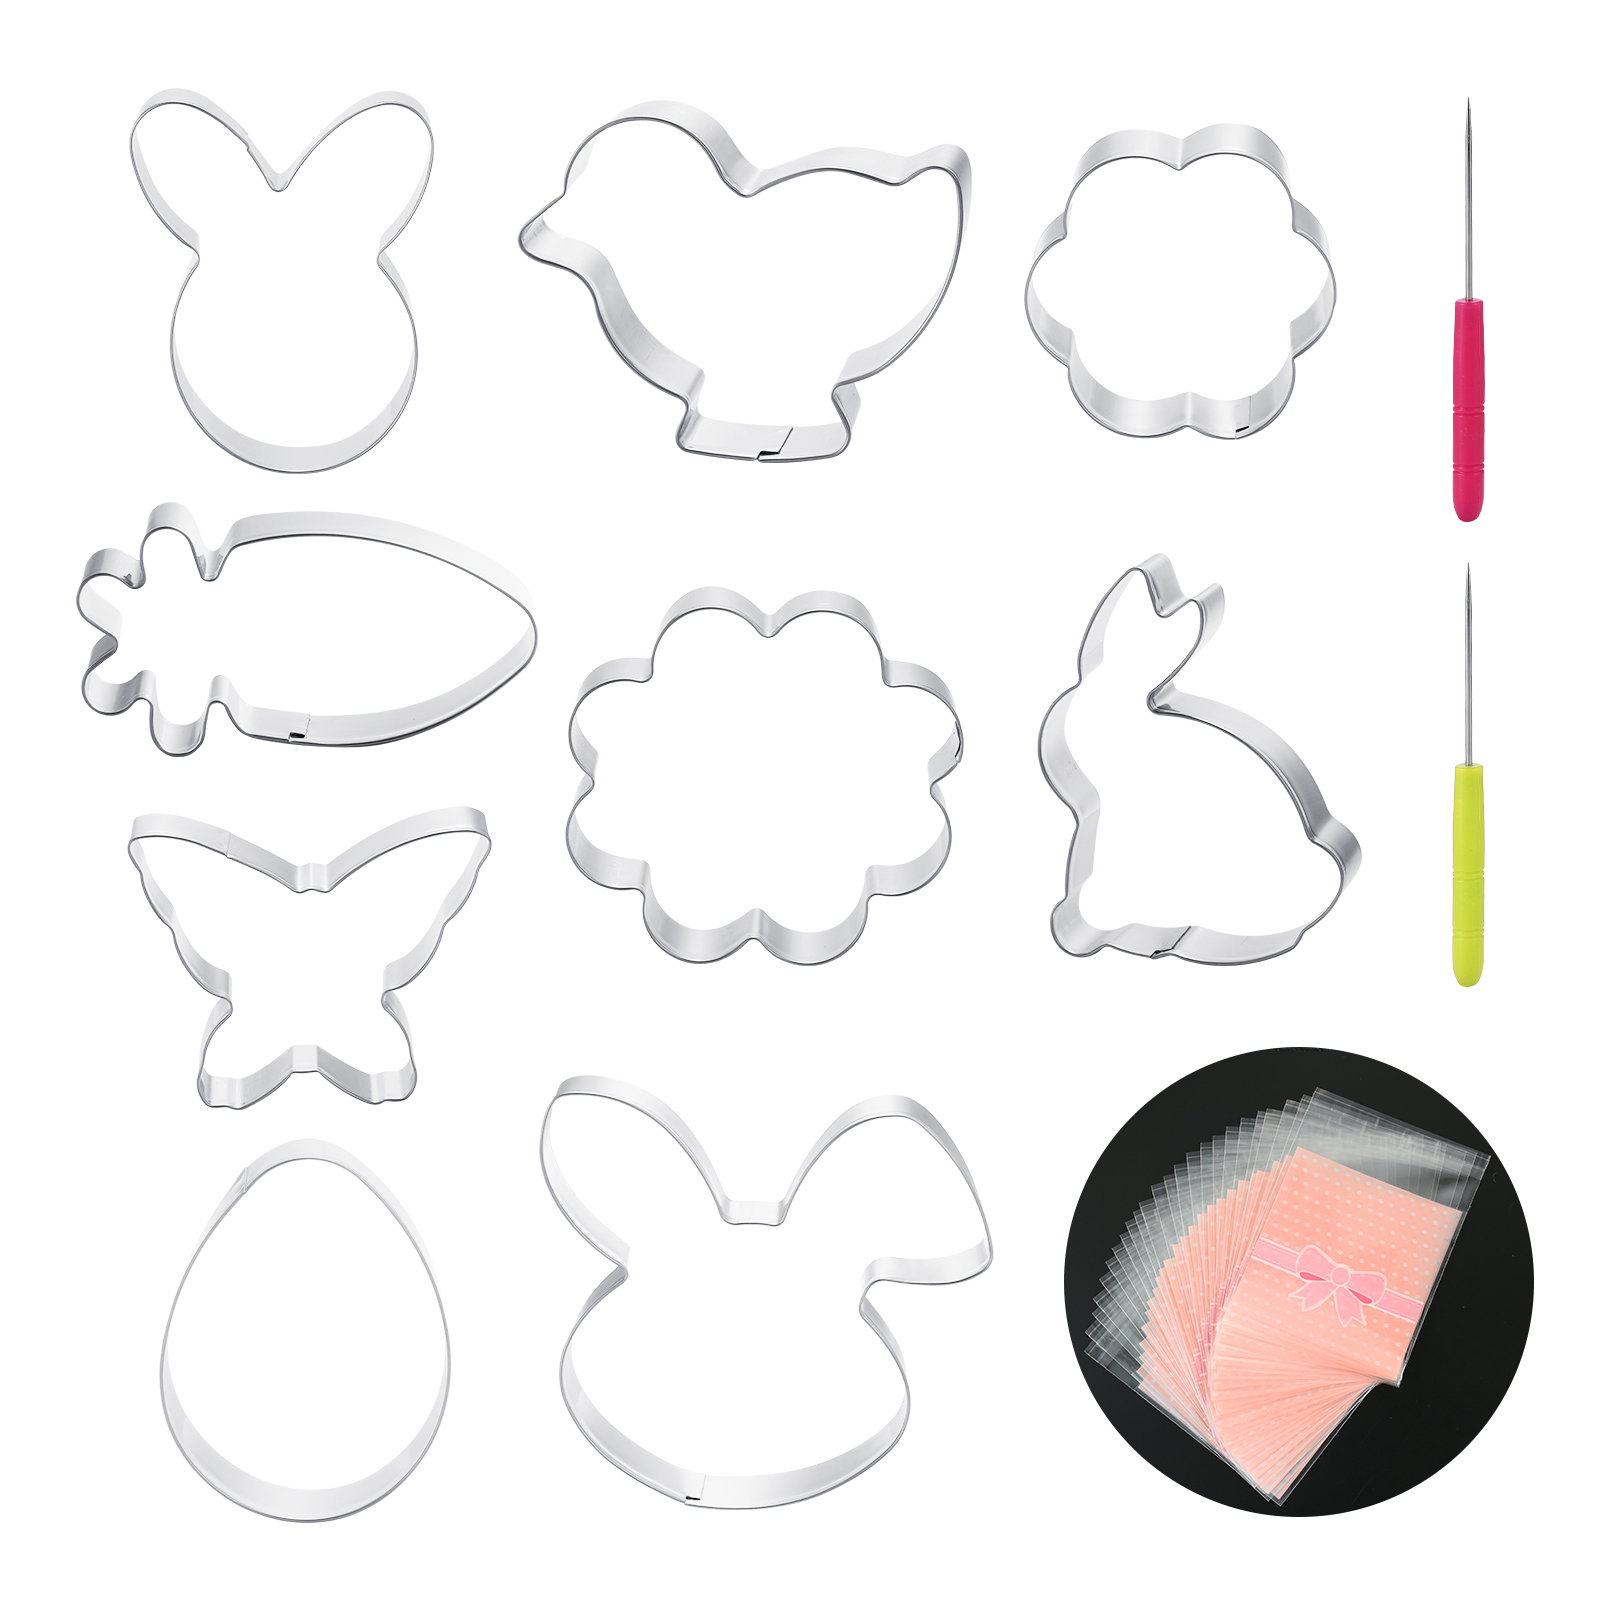 New Easter Cookie Cutters and Designs